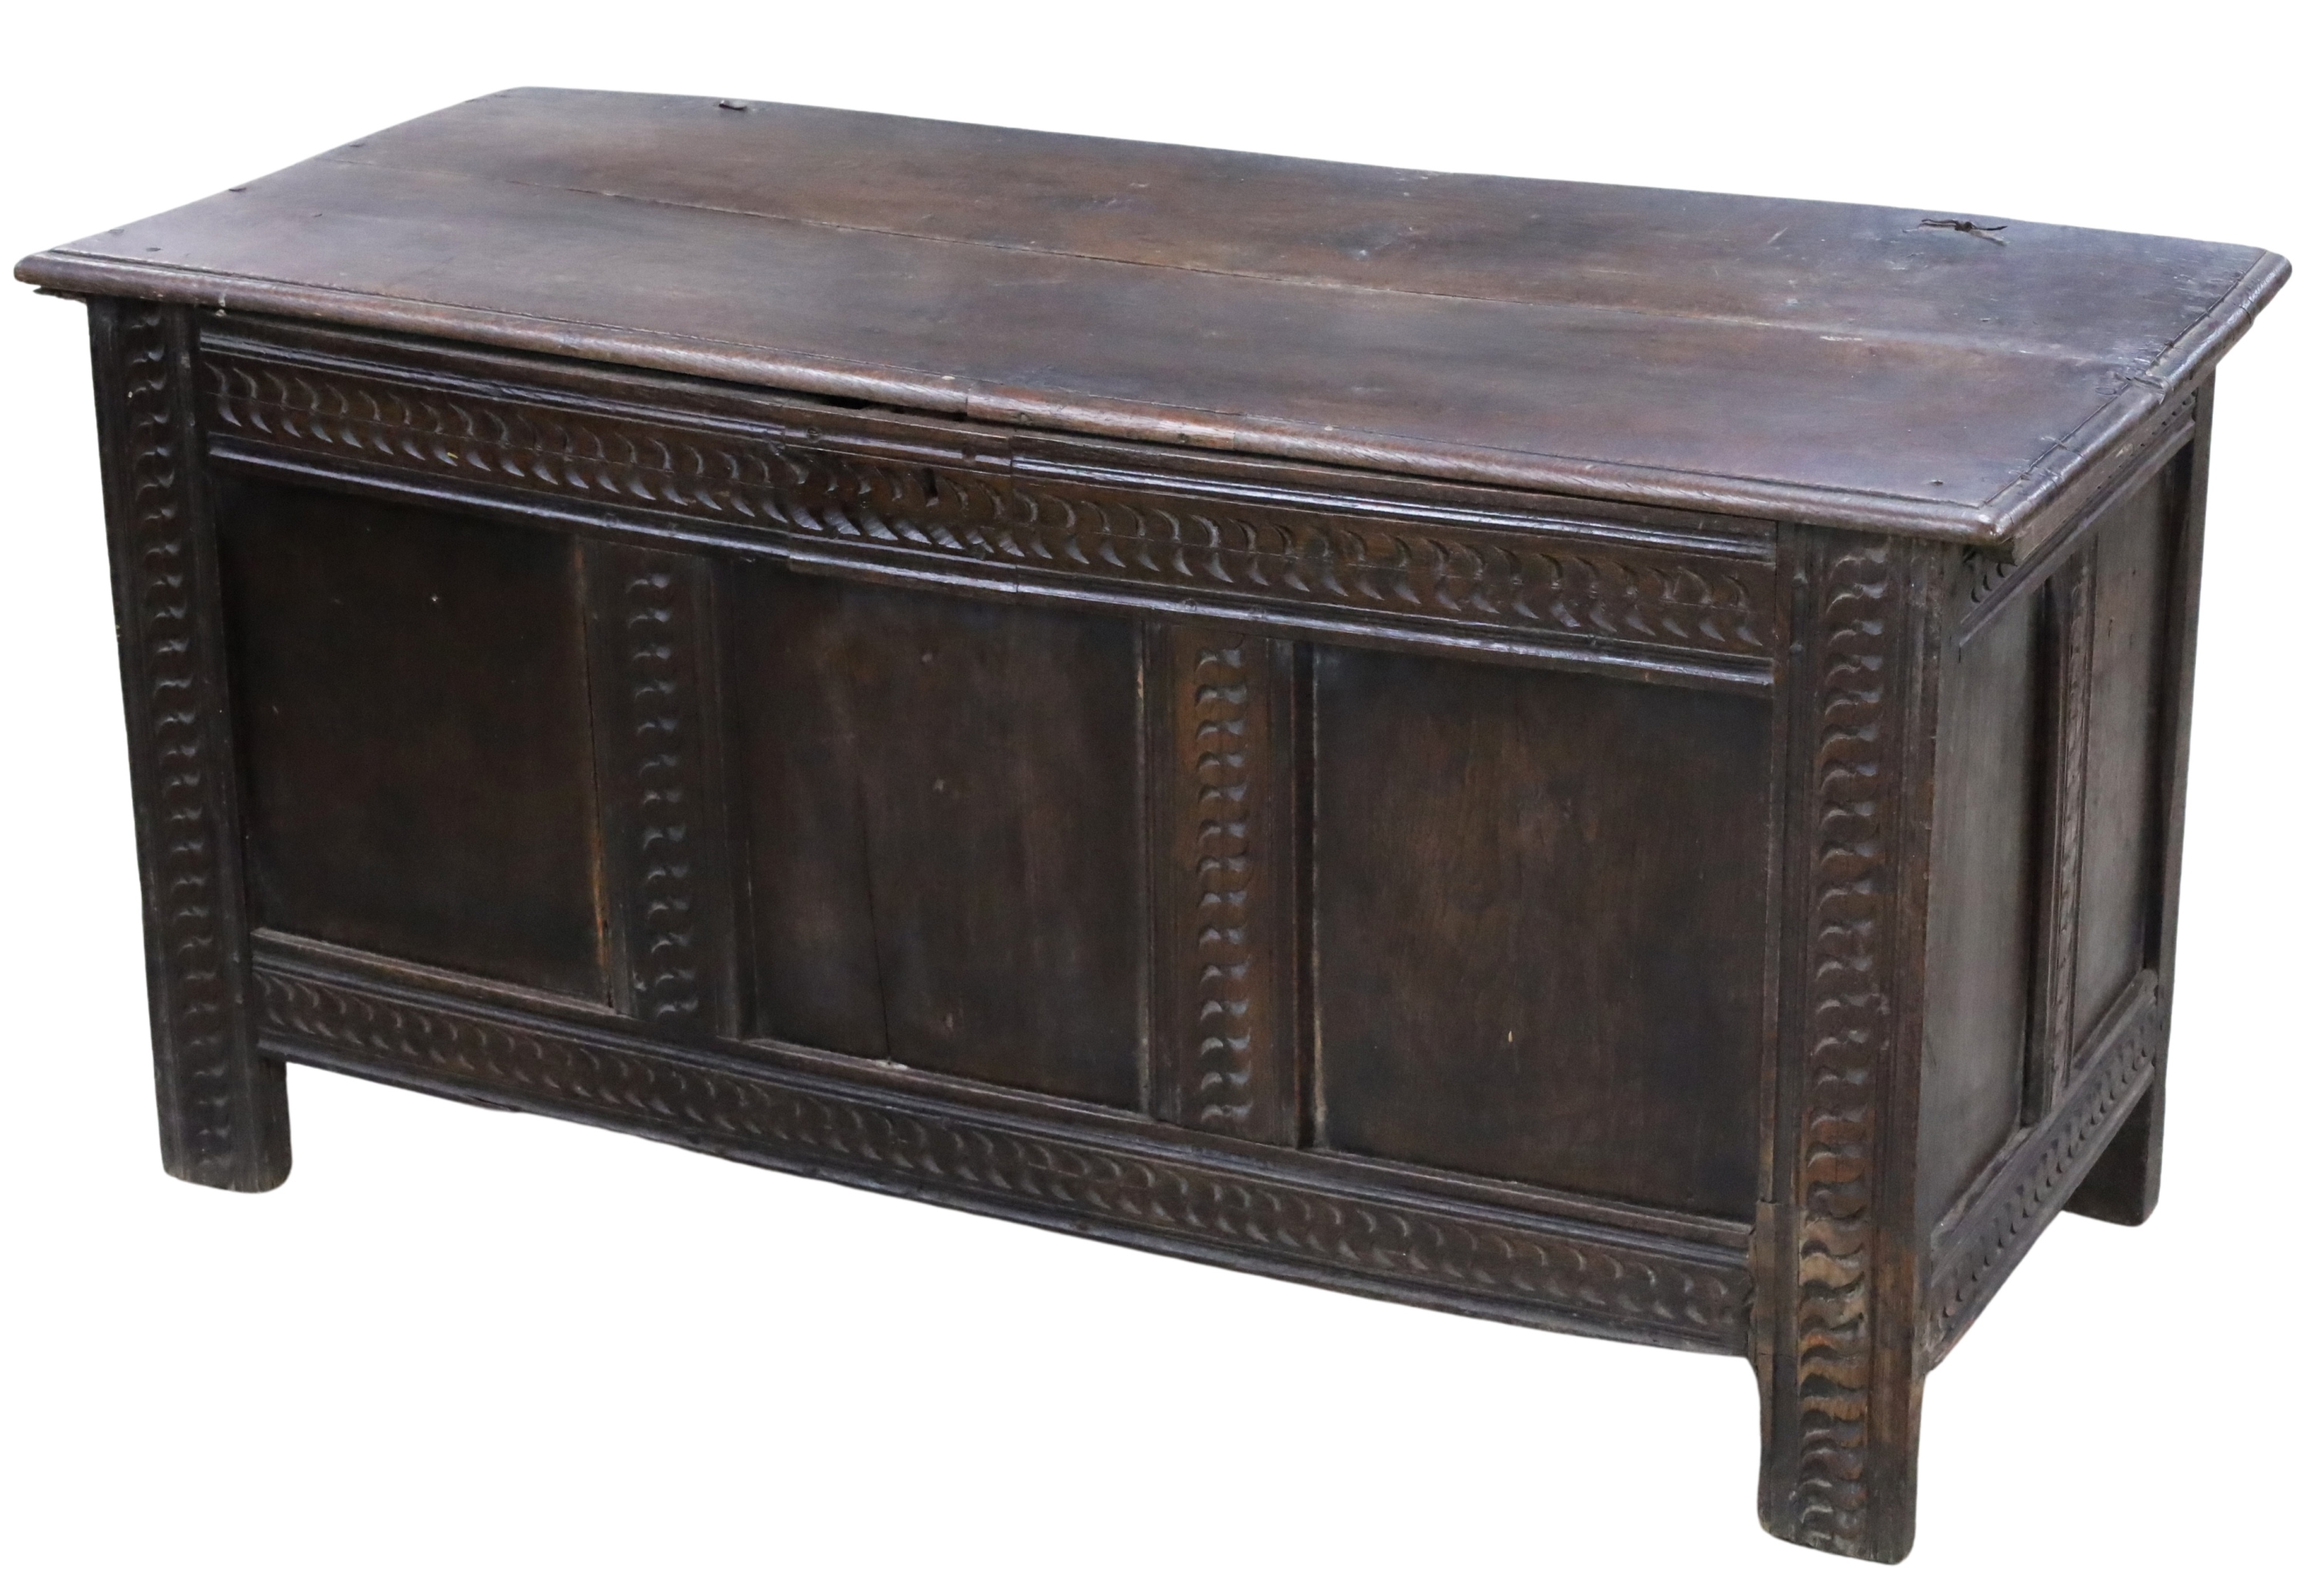 EARLY ENGLISH JACOBEAN CARVED OAK